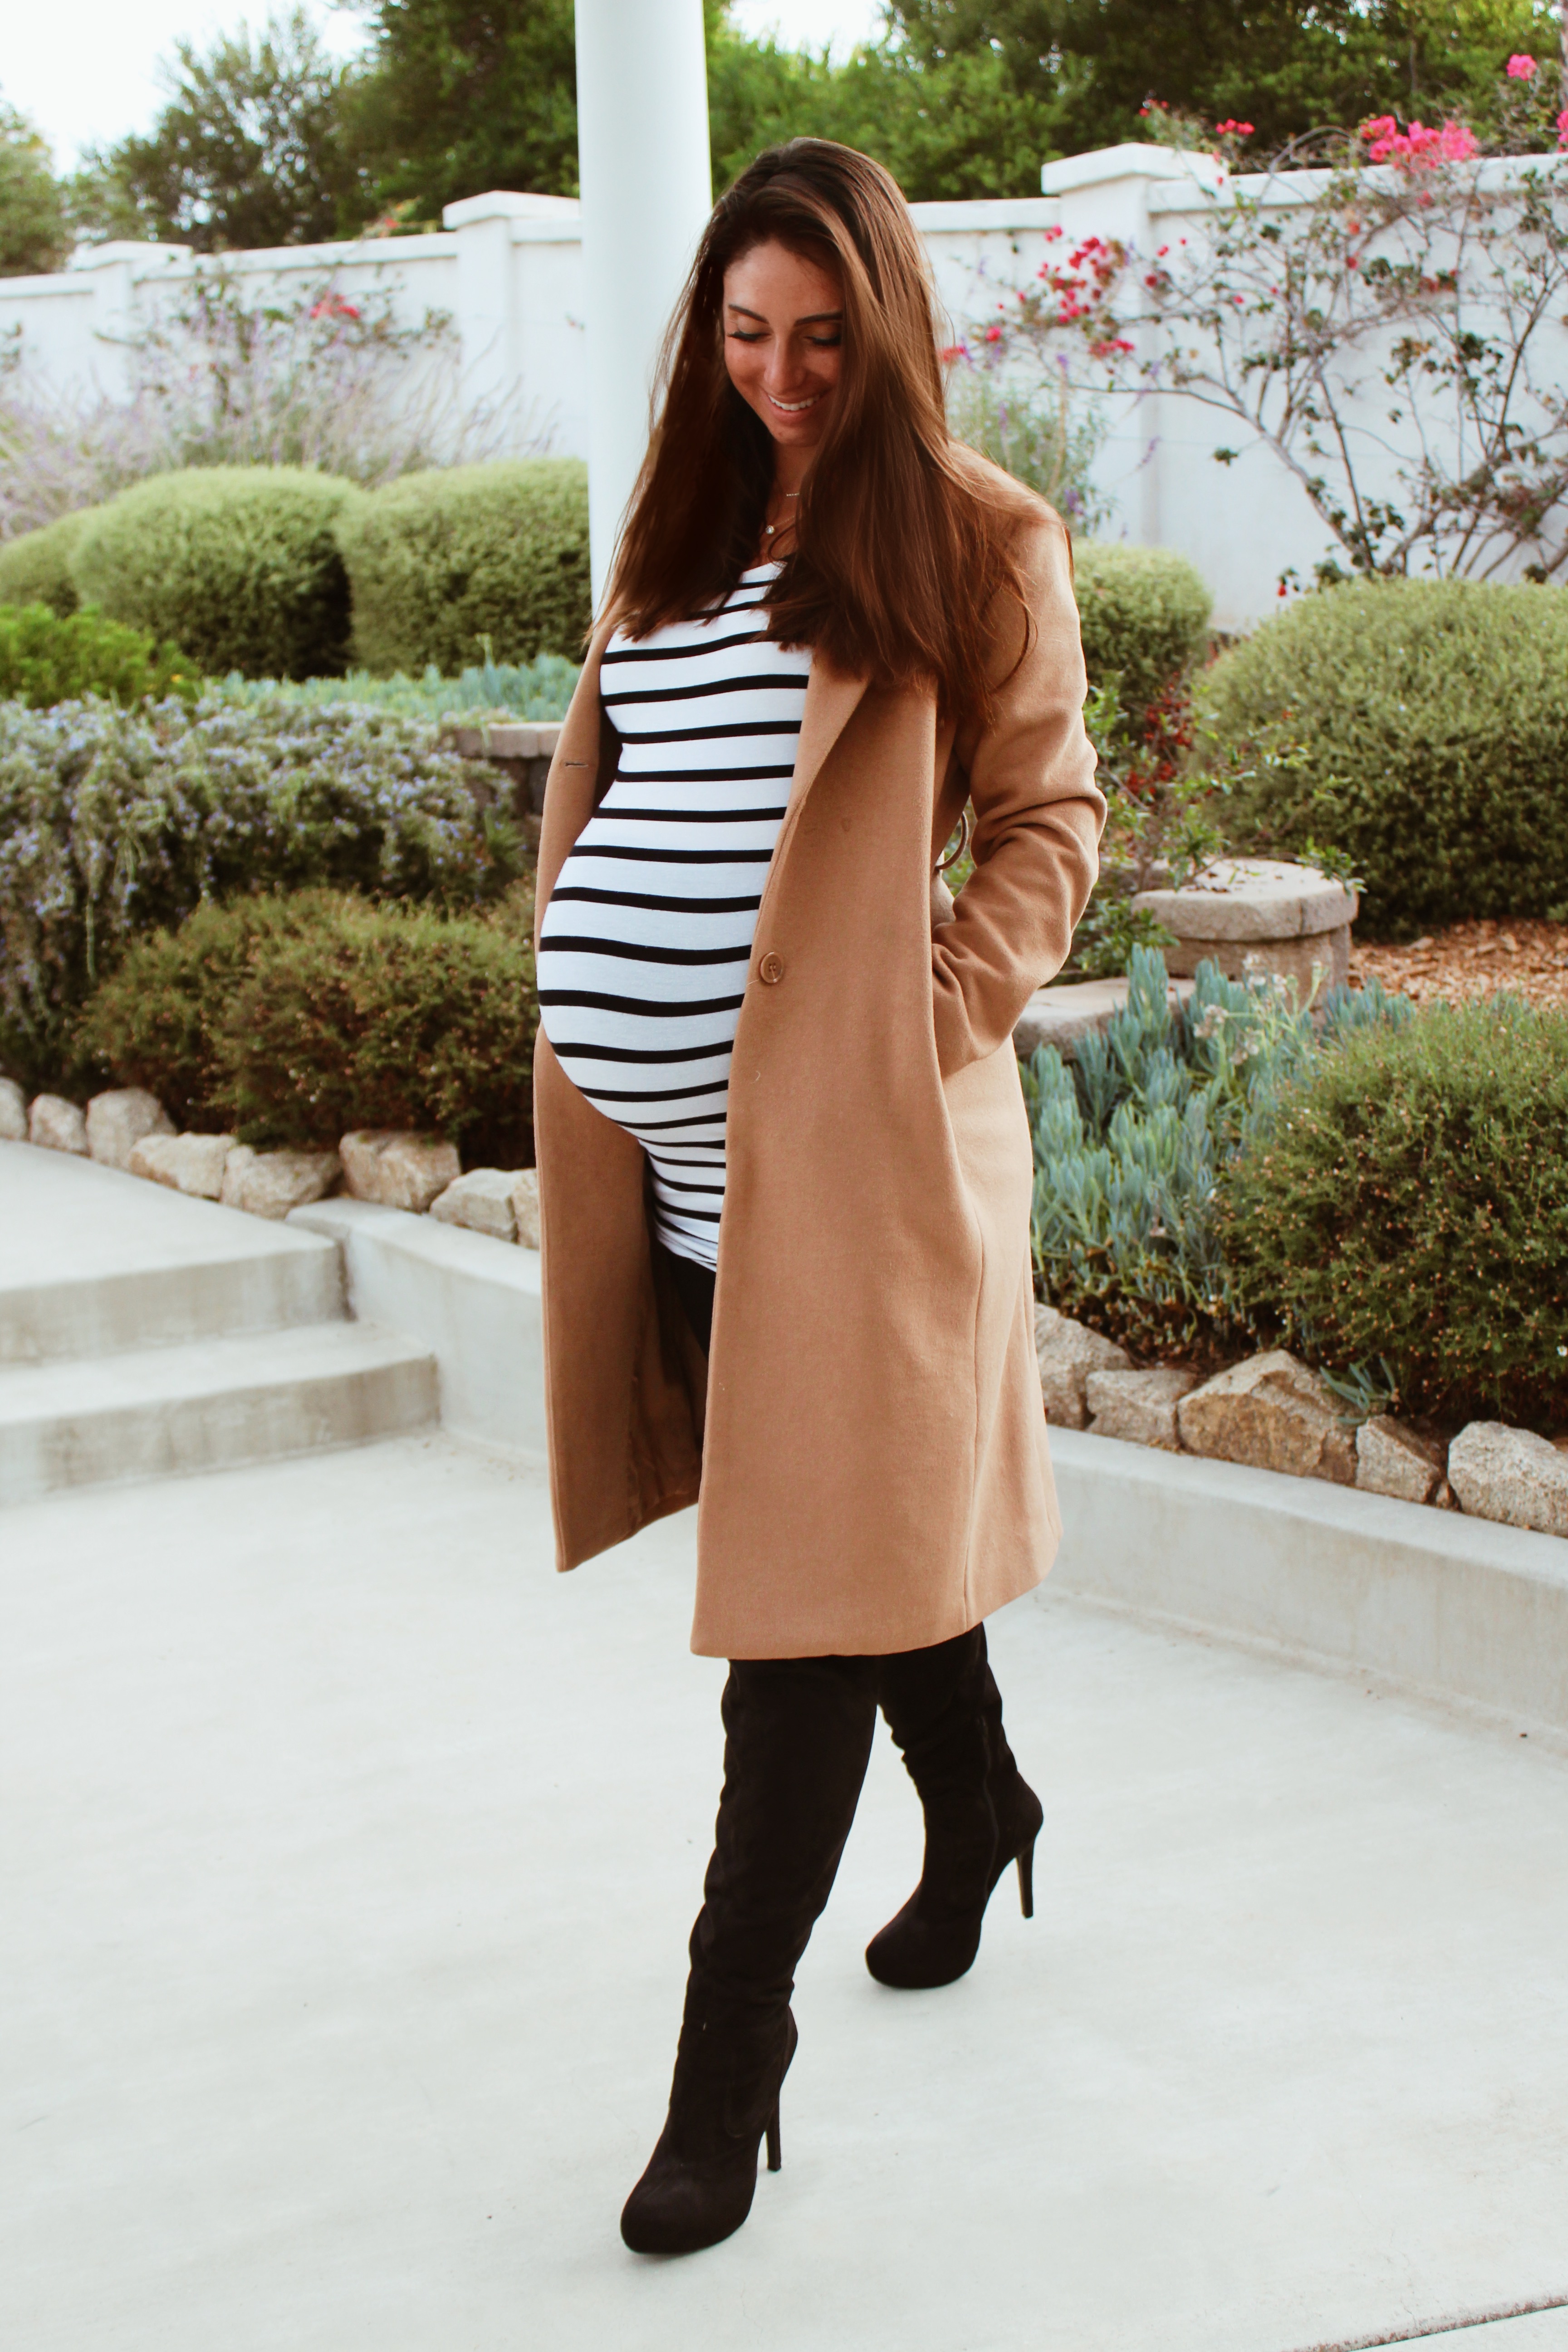 Rental maternity clothes: the genius way to look good at holiday parties |  Cool Mom Picks